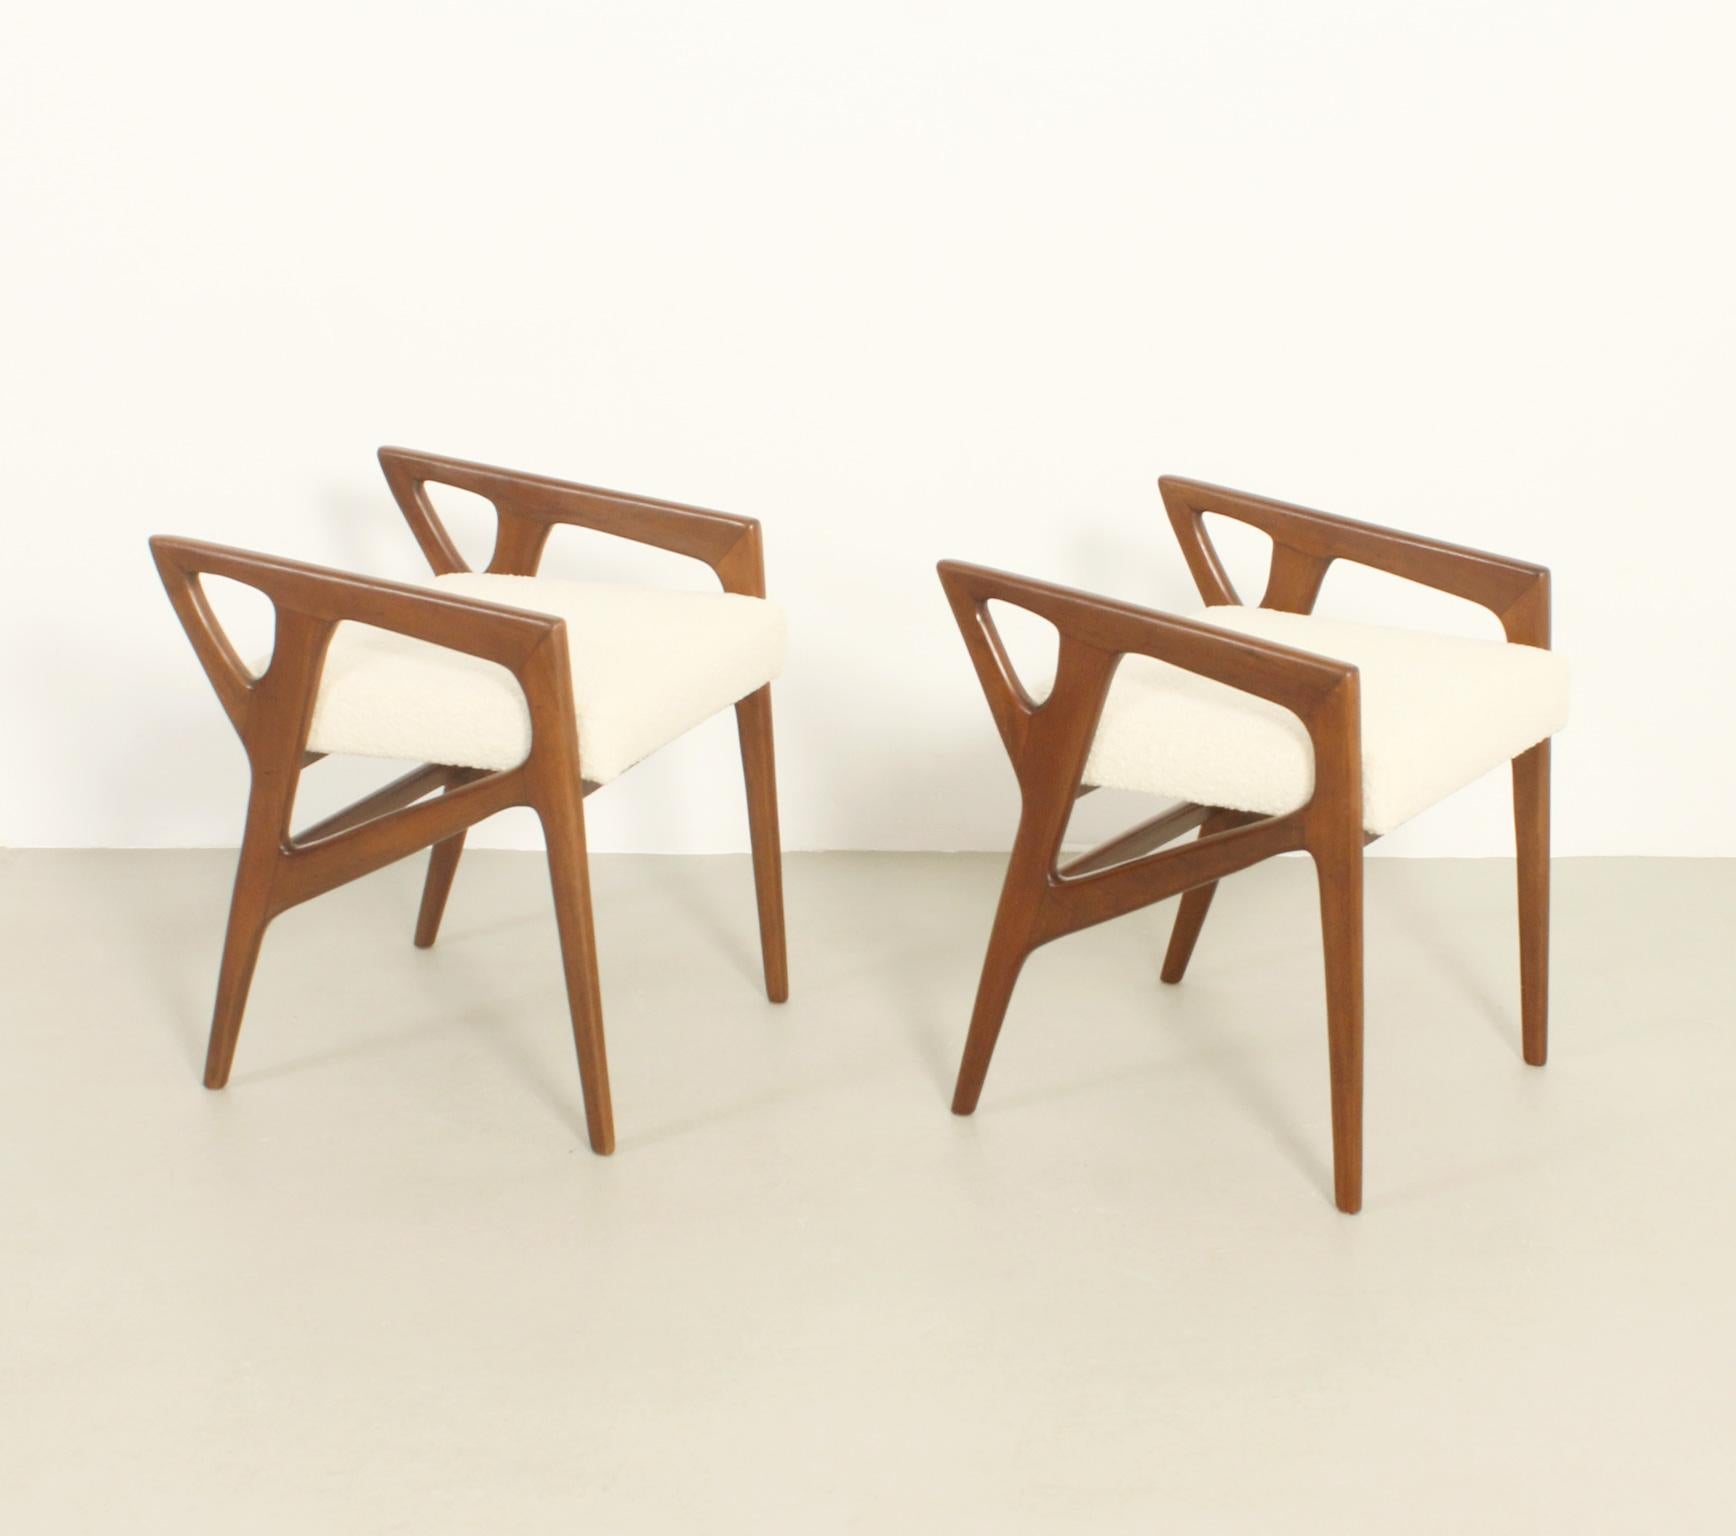 Pair of Stools by Gio Ponti for Cassina, Italy, 1953 For Sale 2